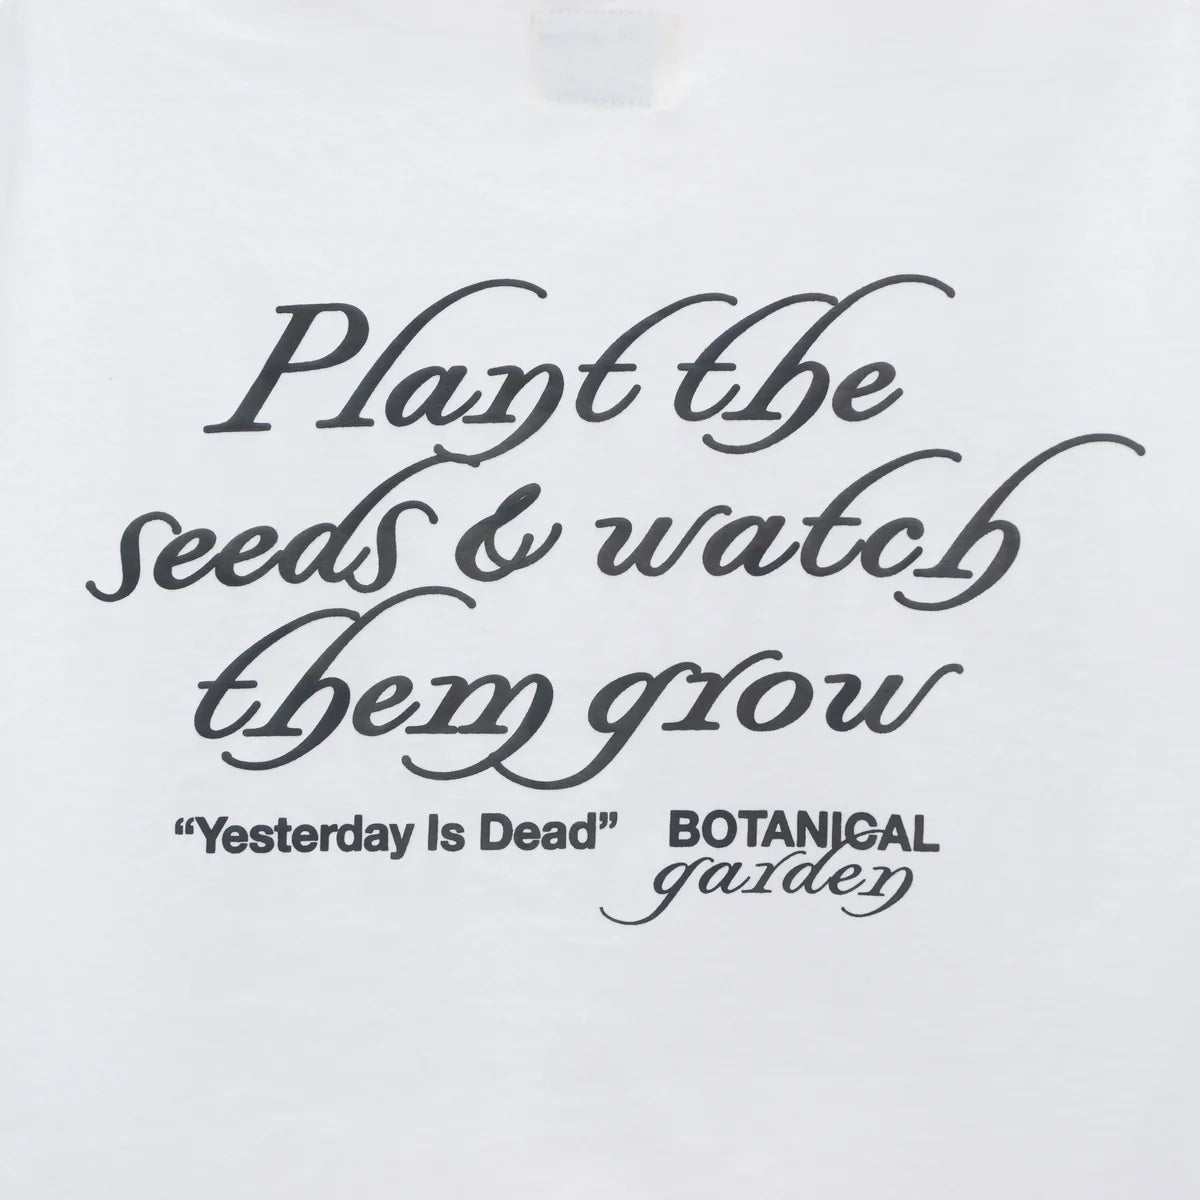 YESTERDAY IS DEAD SUCCULENT TEE WHITE t-shirt featuring the phrase "plant the seeds & watch them grow 'YESTERDAY IS DEAD' botanical garden" printed in stylized black font.